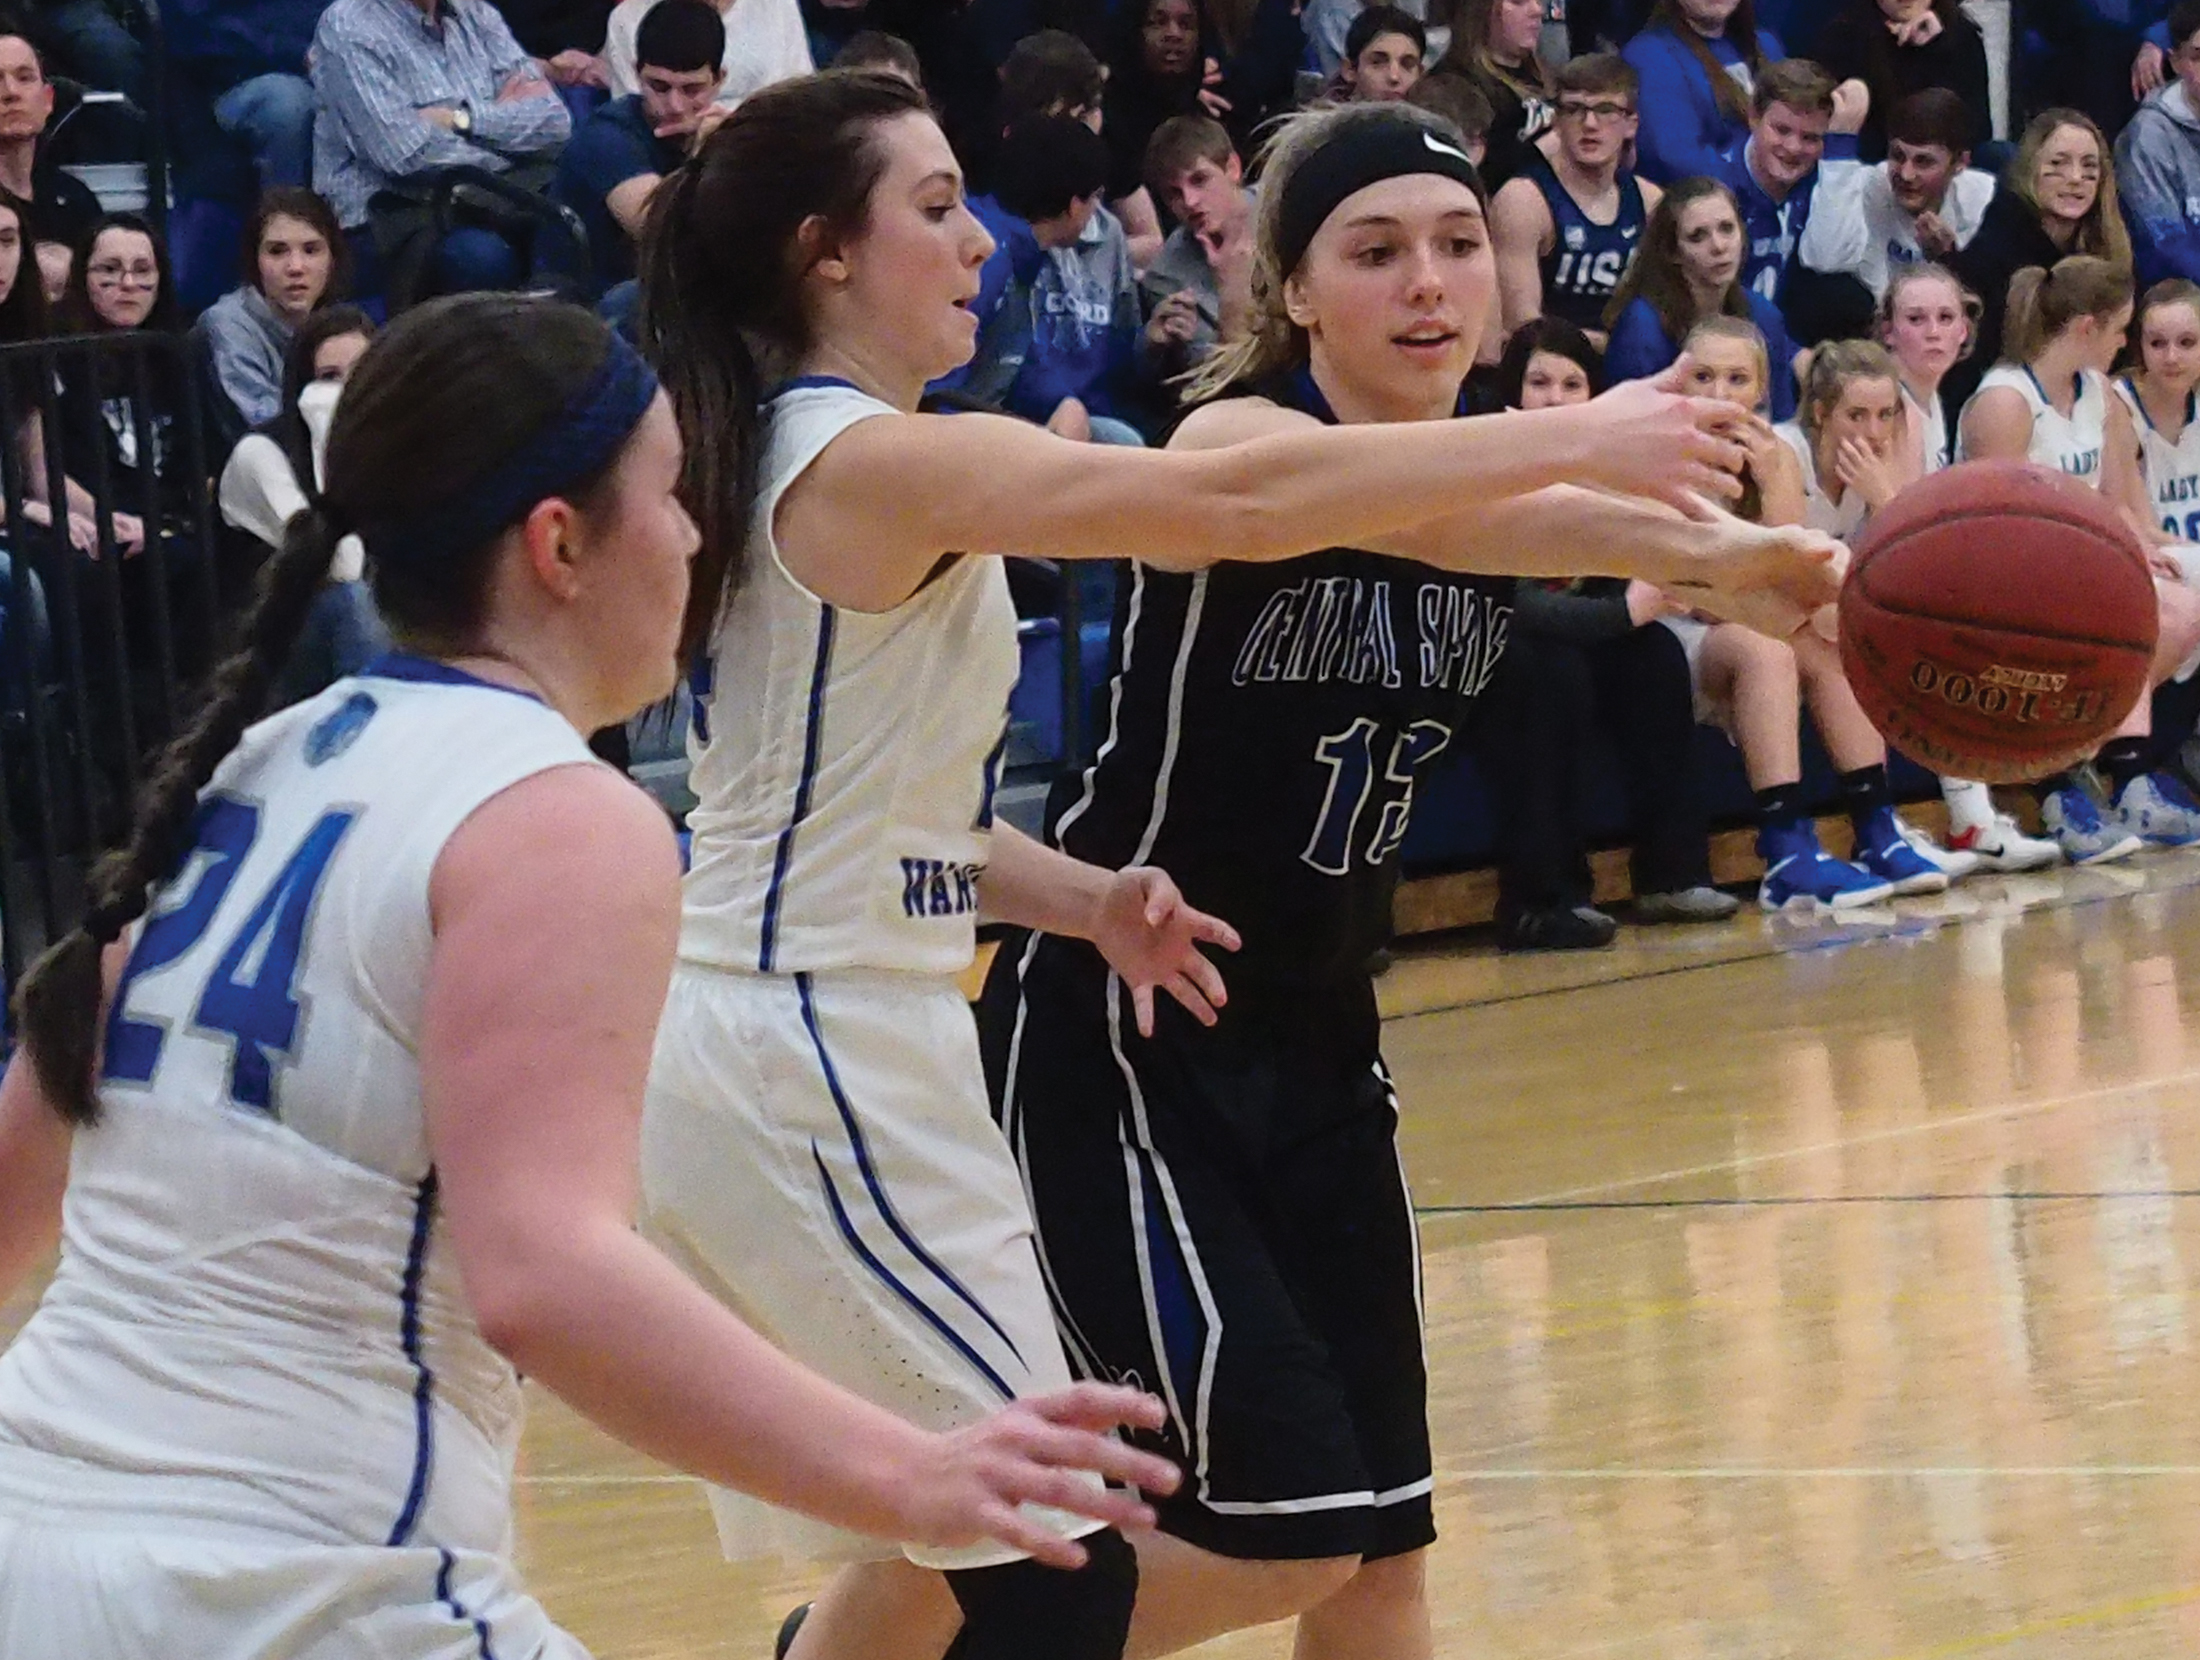 Lady Warriors reach semis with 53-34 win over Panthers